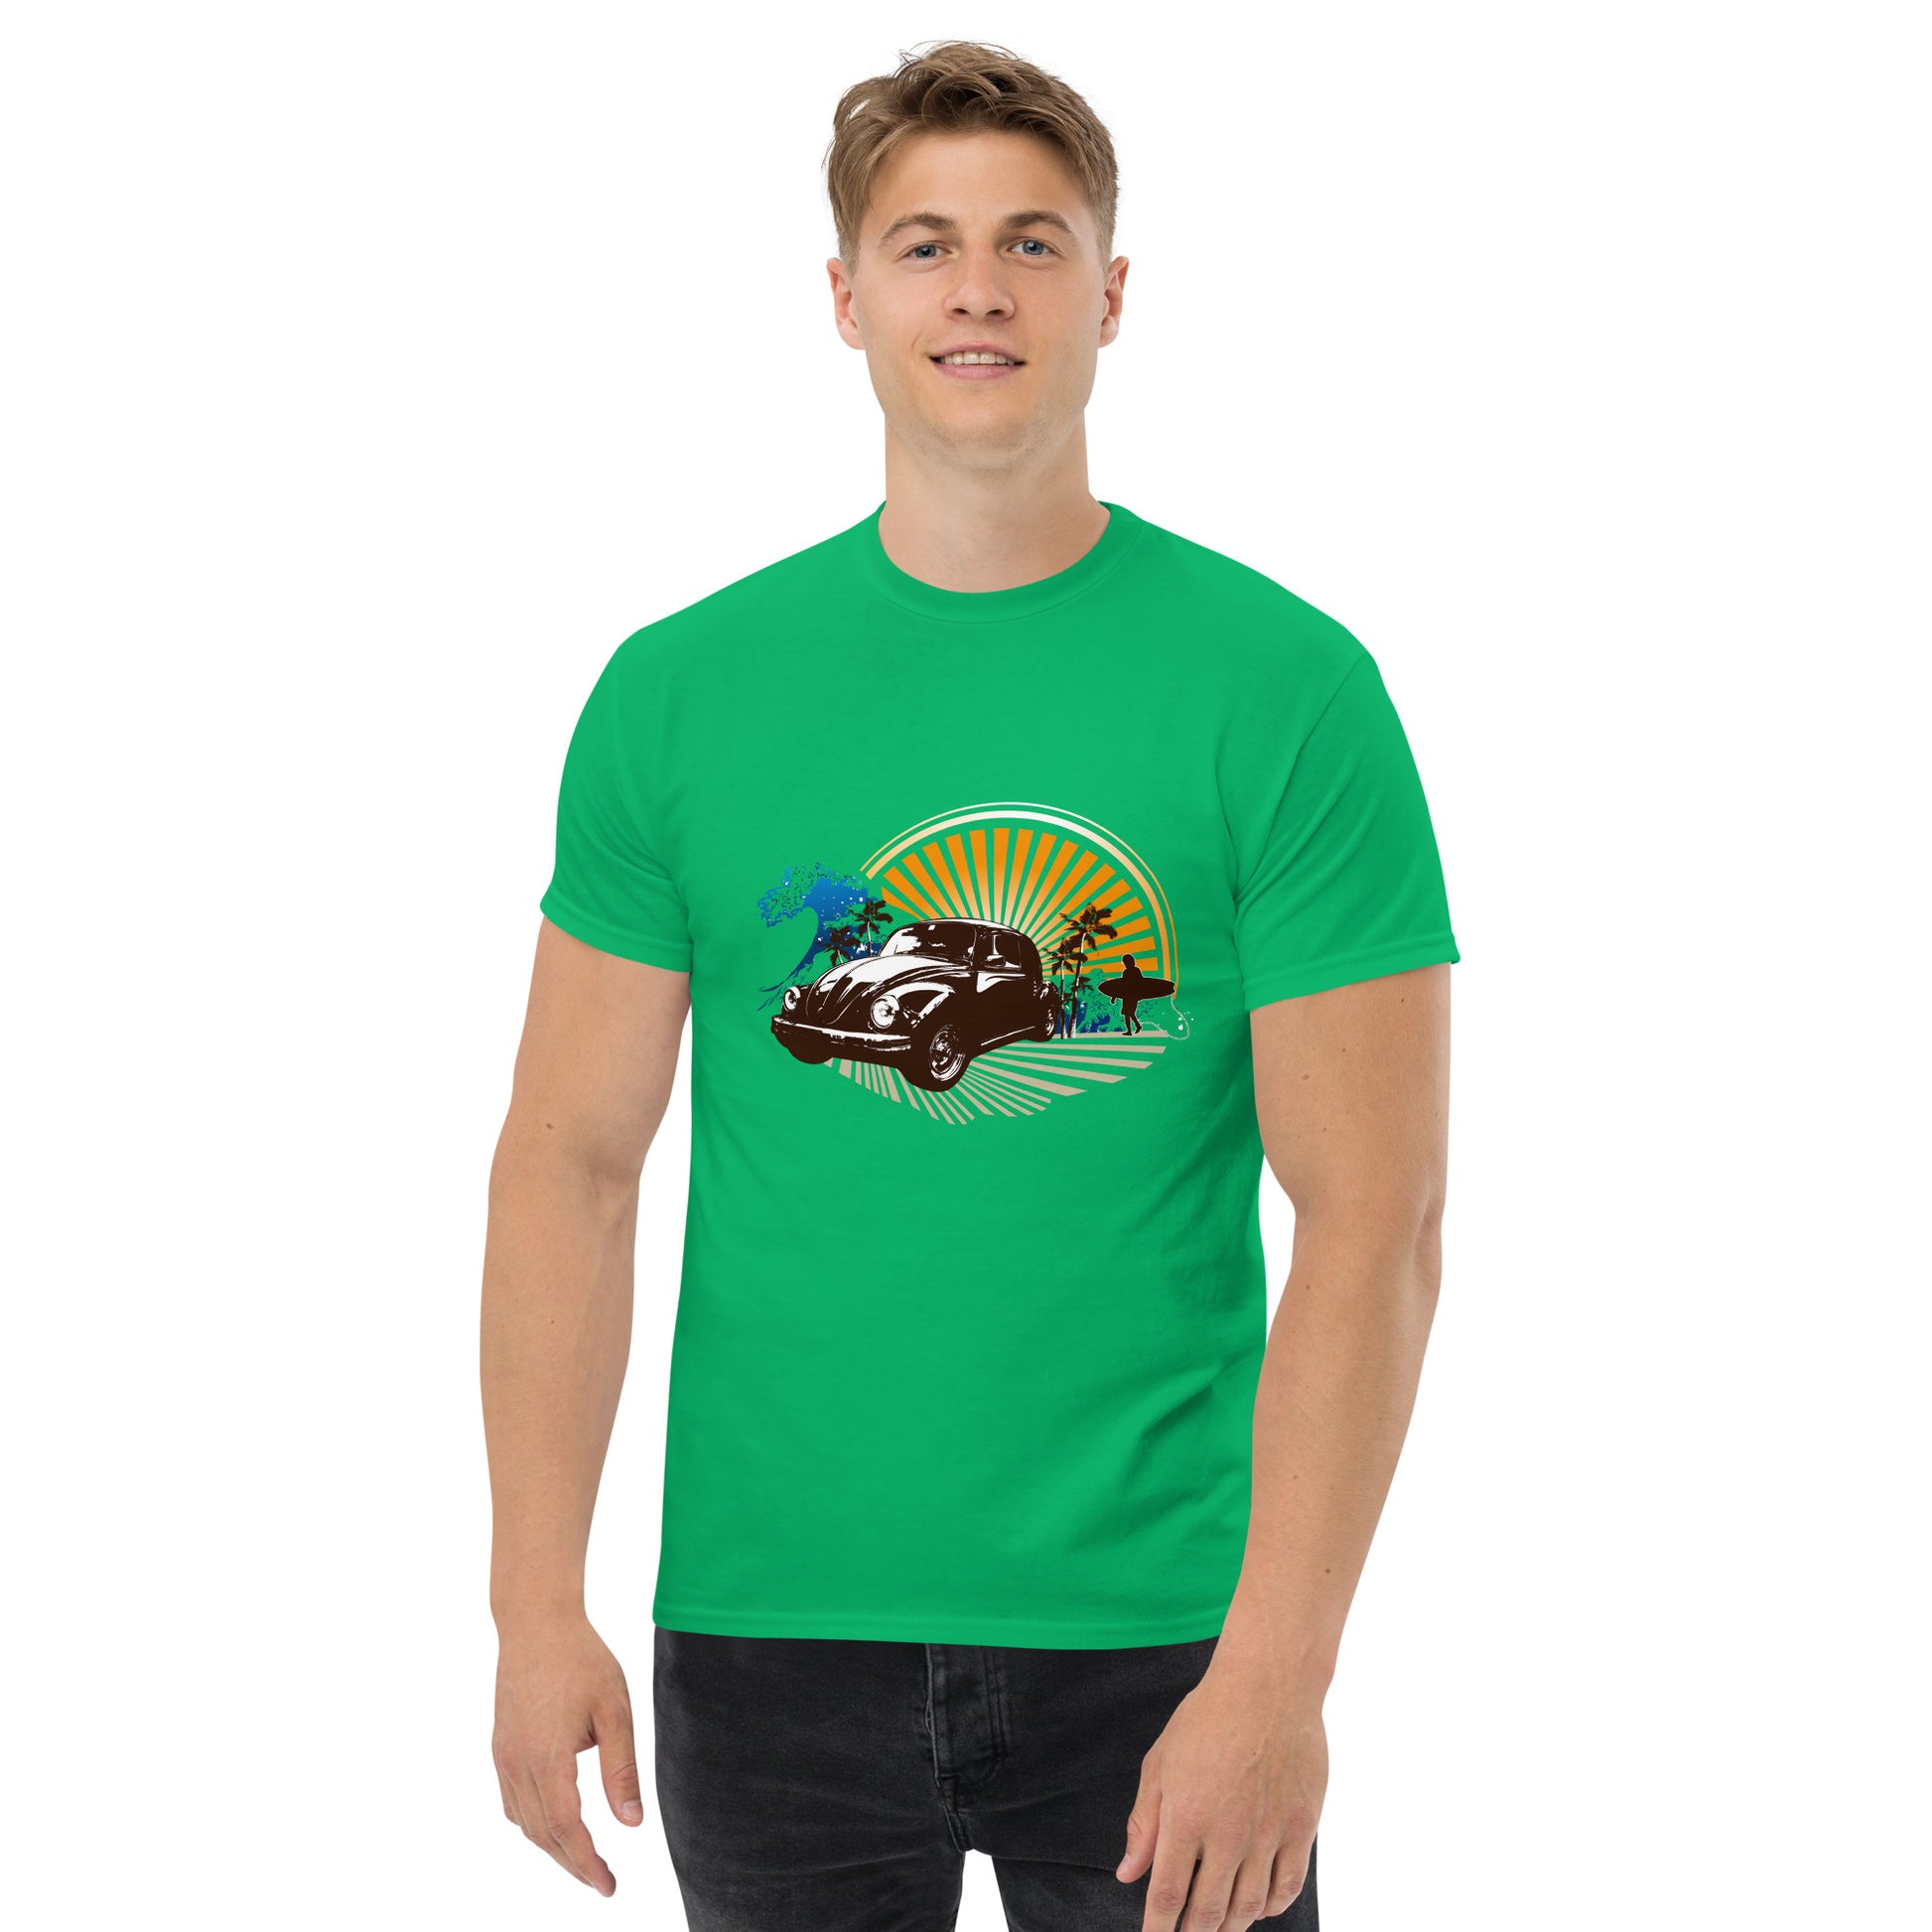 Men with Irish green t-shirt with sunset and beetle car